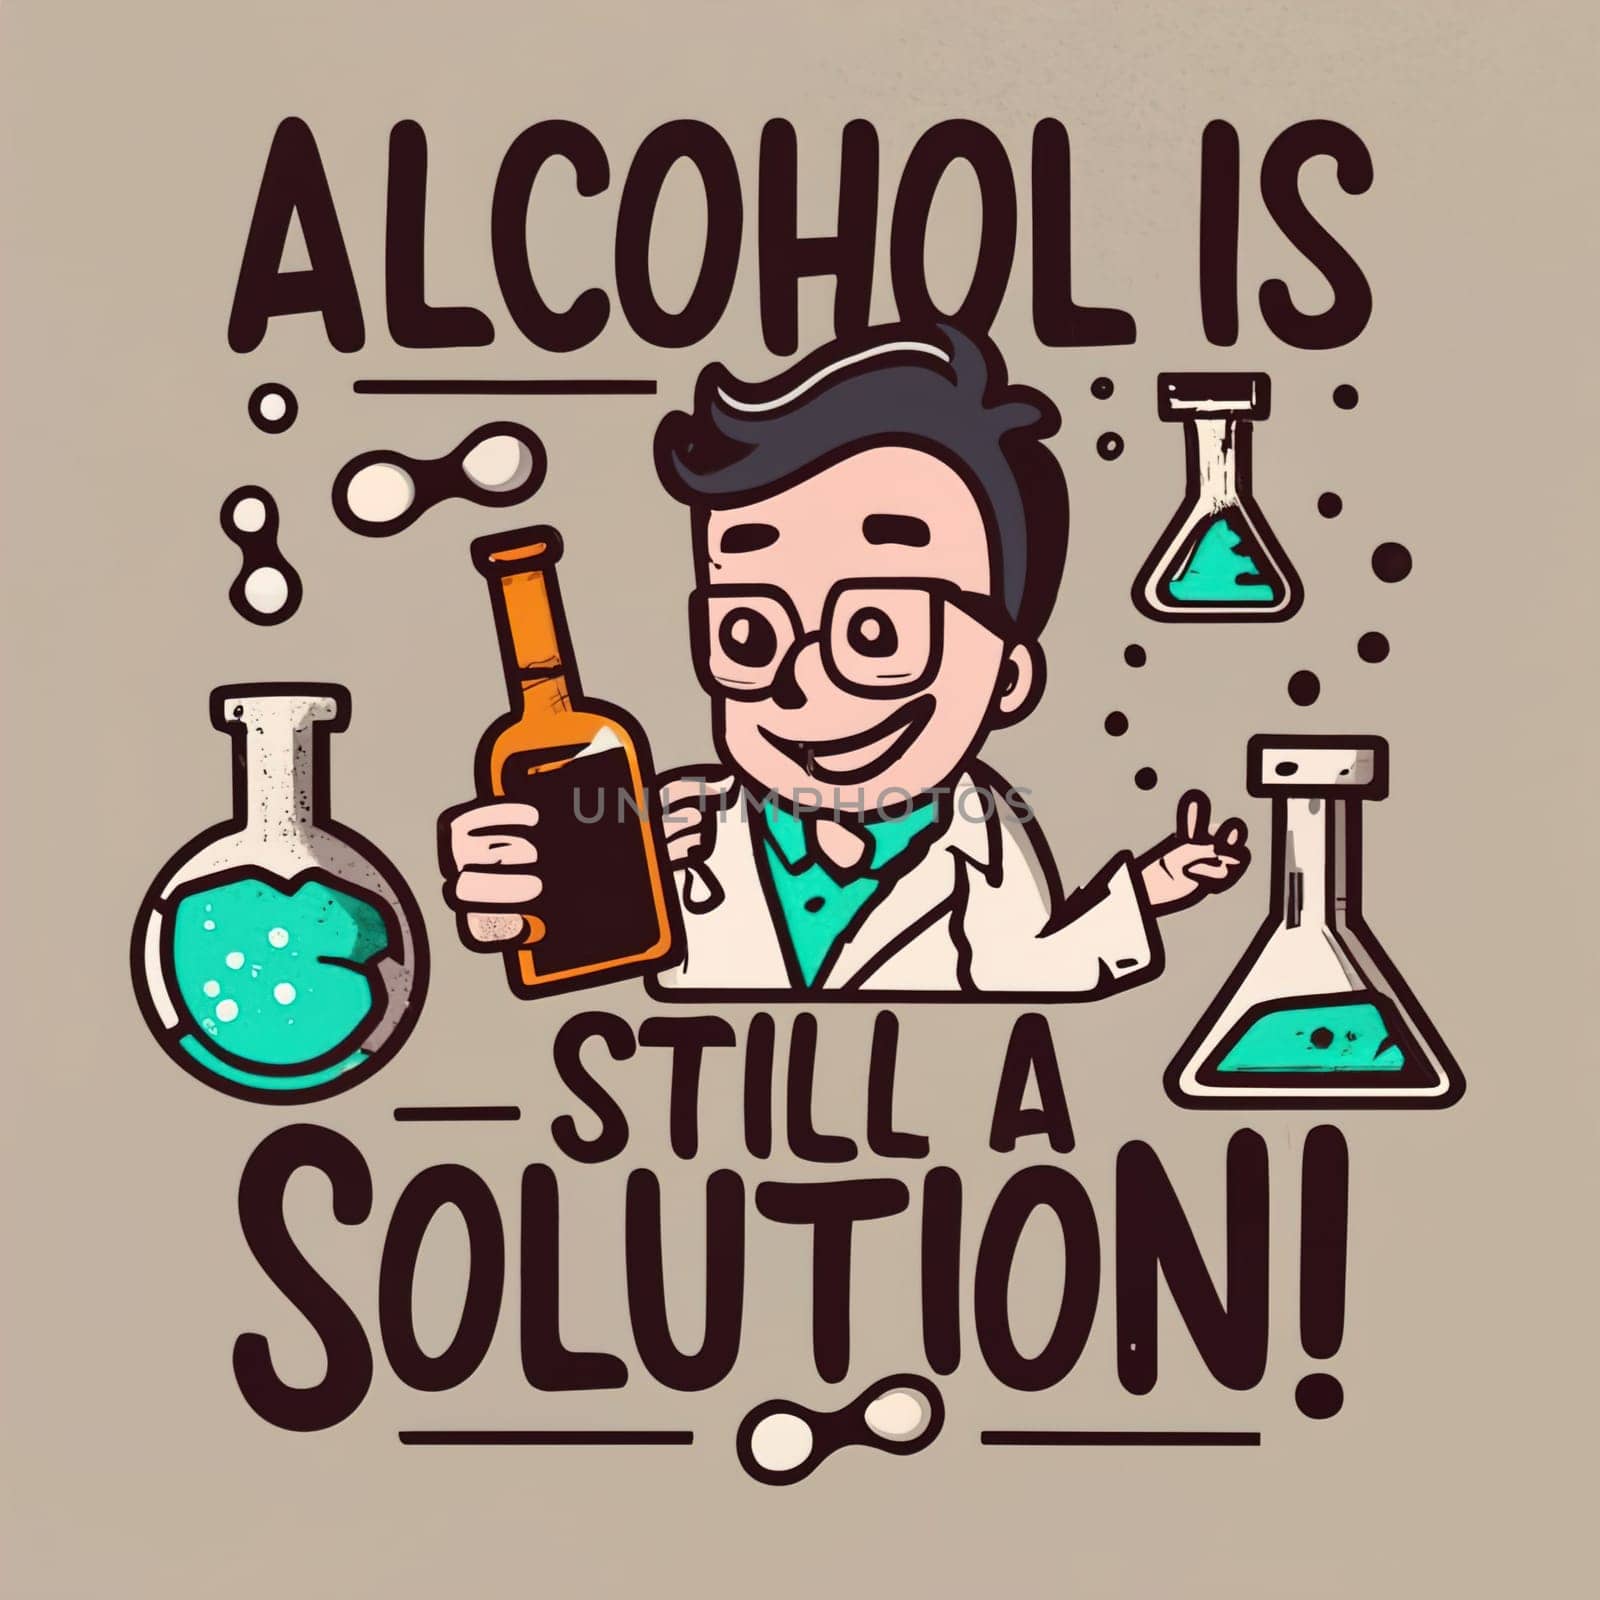 Chemistry Nerd Illustration with Alcohol Is Still a Solution Typography - Educational Poster Art by igor010